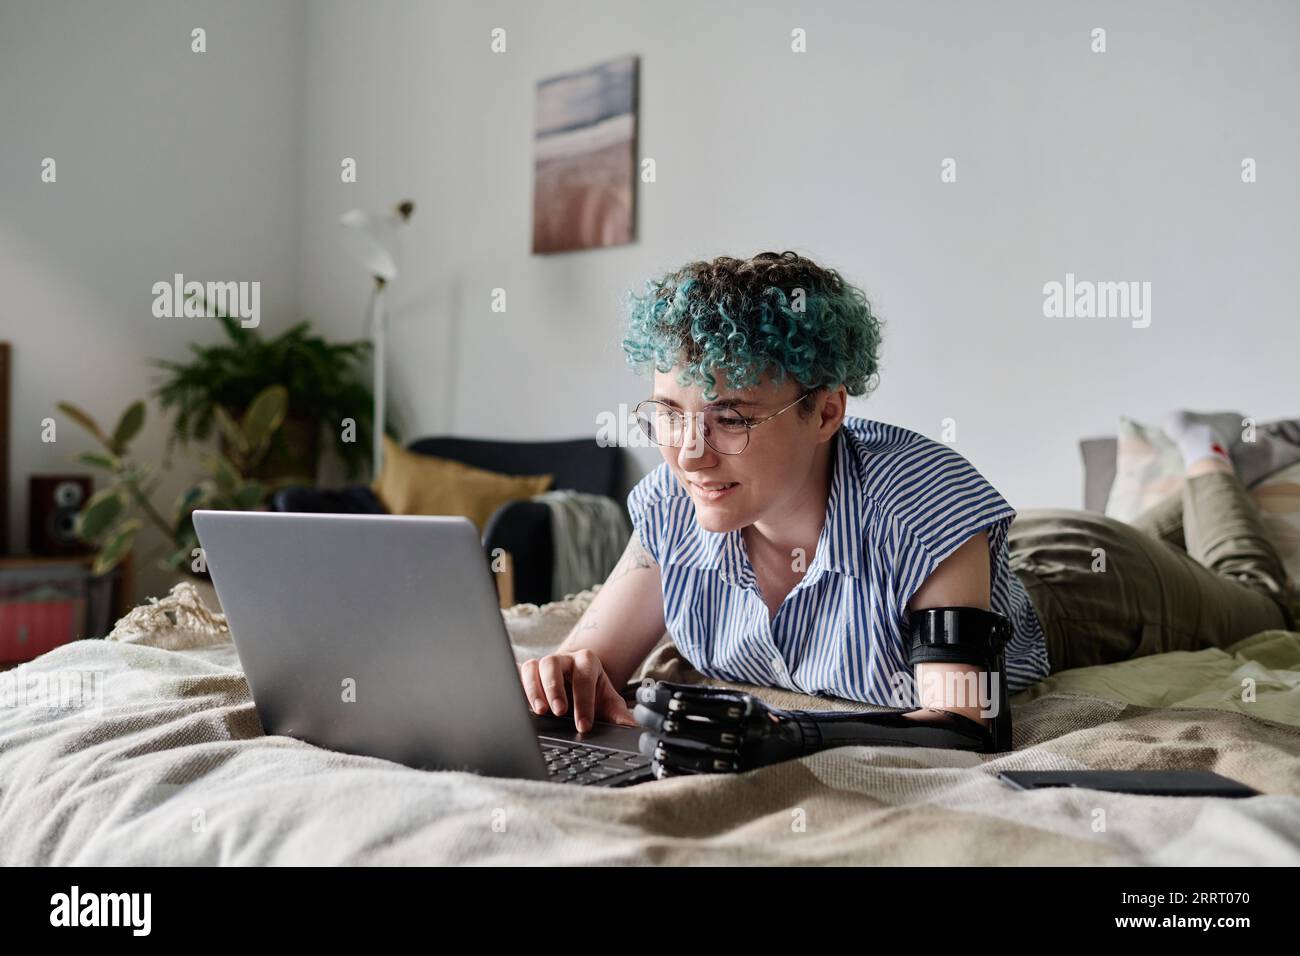 Woman with prosthetic arm using laptop in her free time while she lying on bed in bedroom Stock Photo